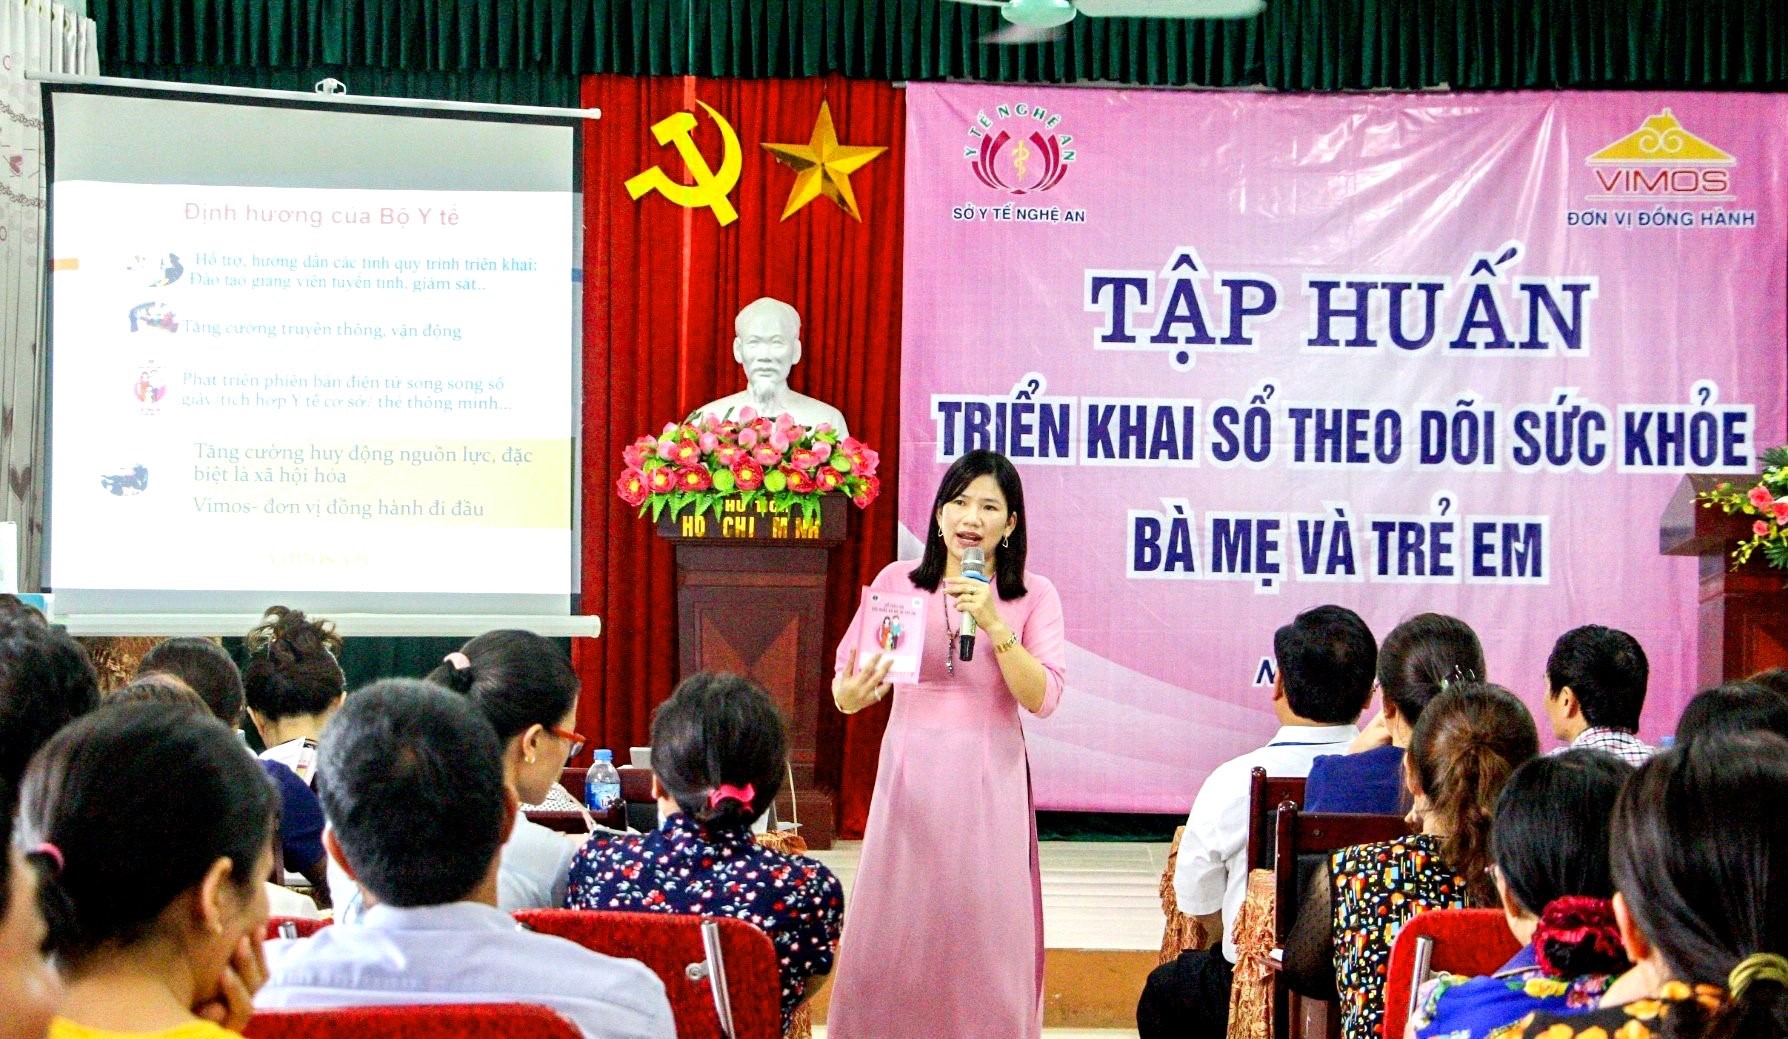 Ms. Thanh Hoa is always dedicated to community activities.